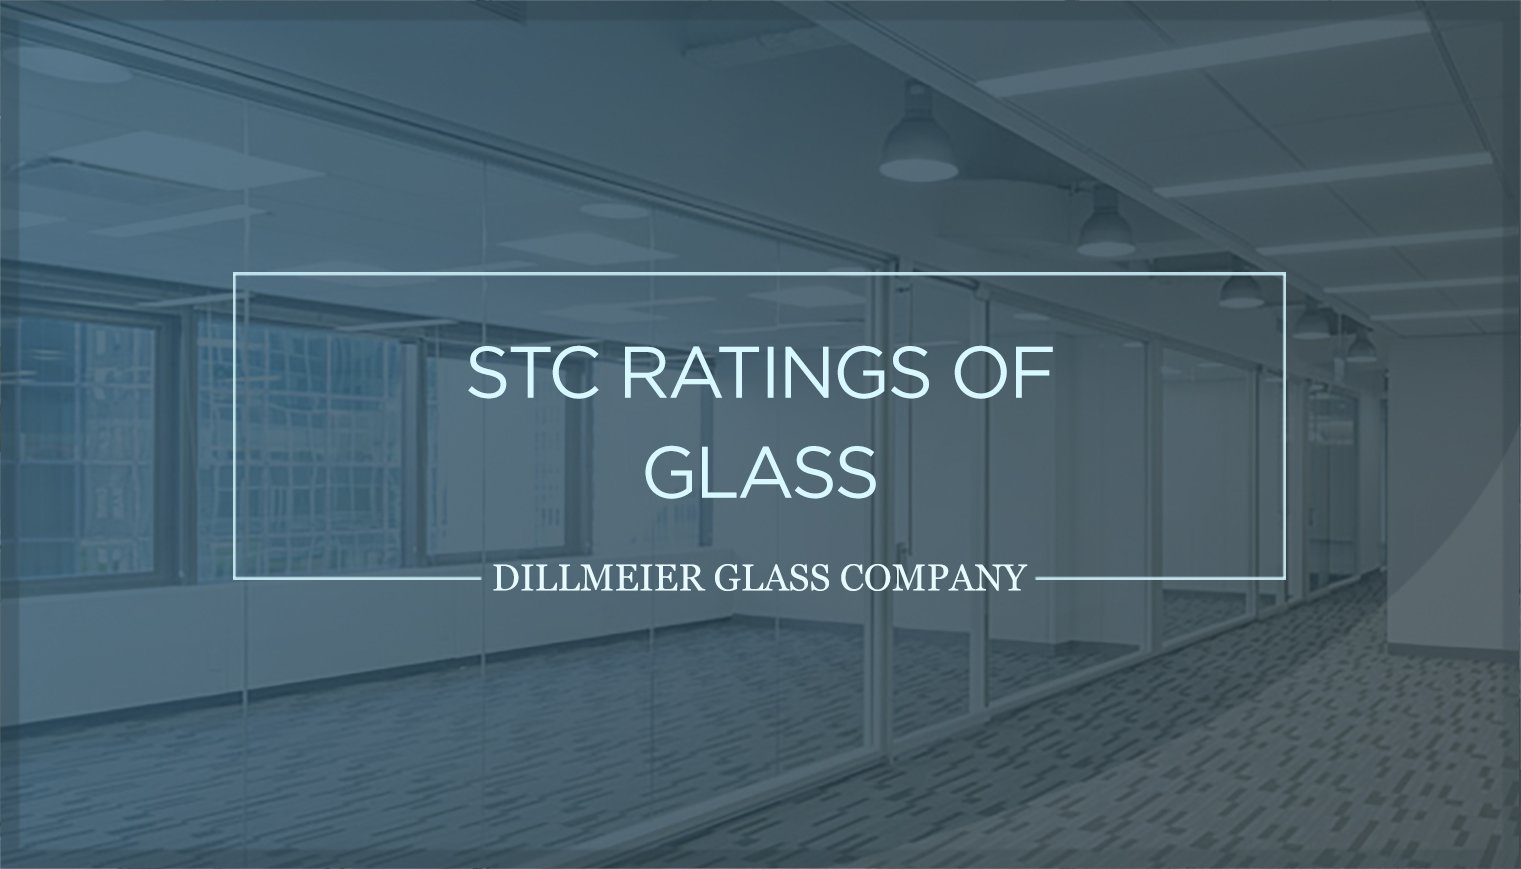 STC Ratings of Glass